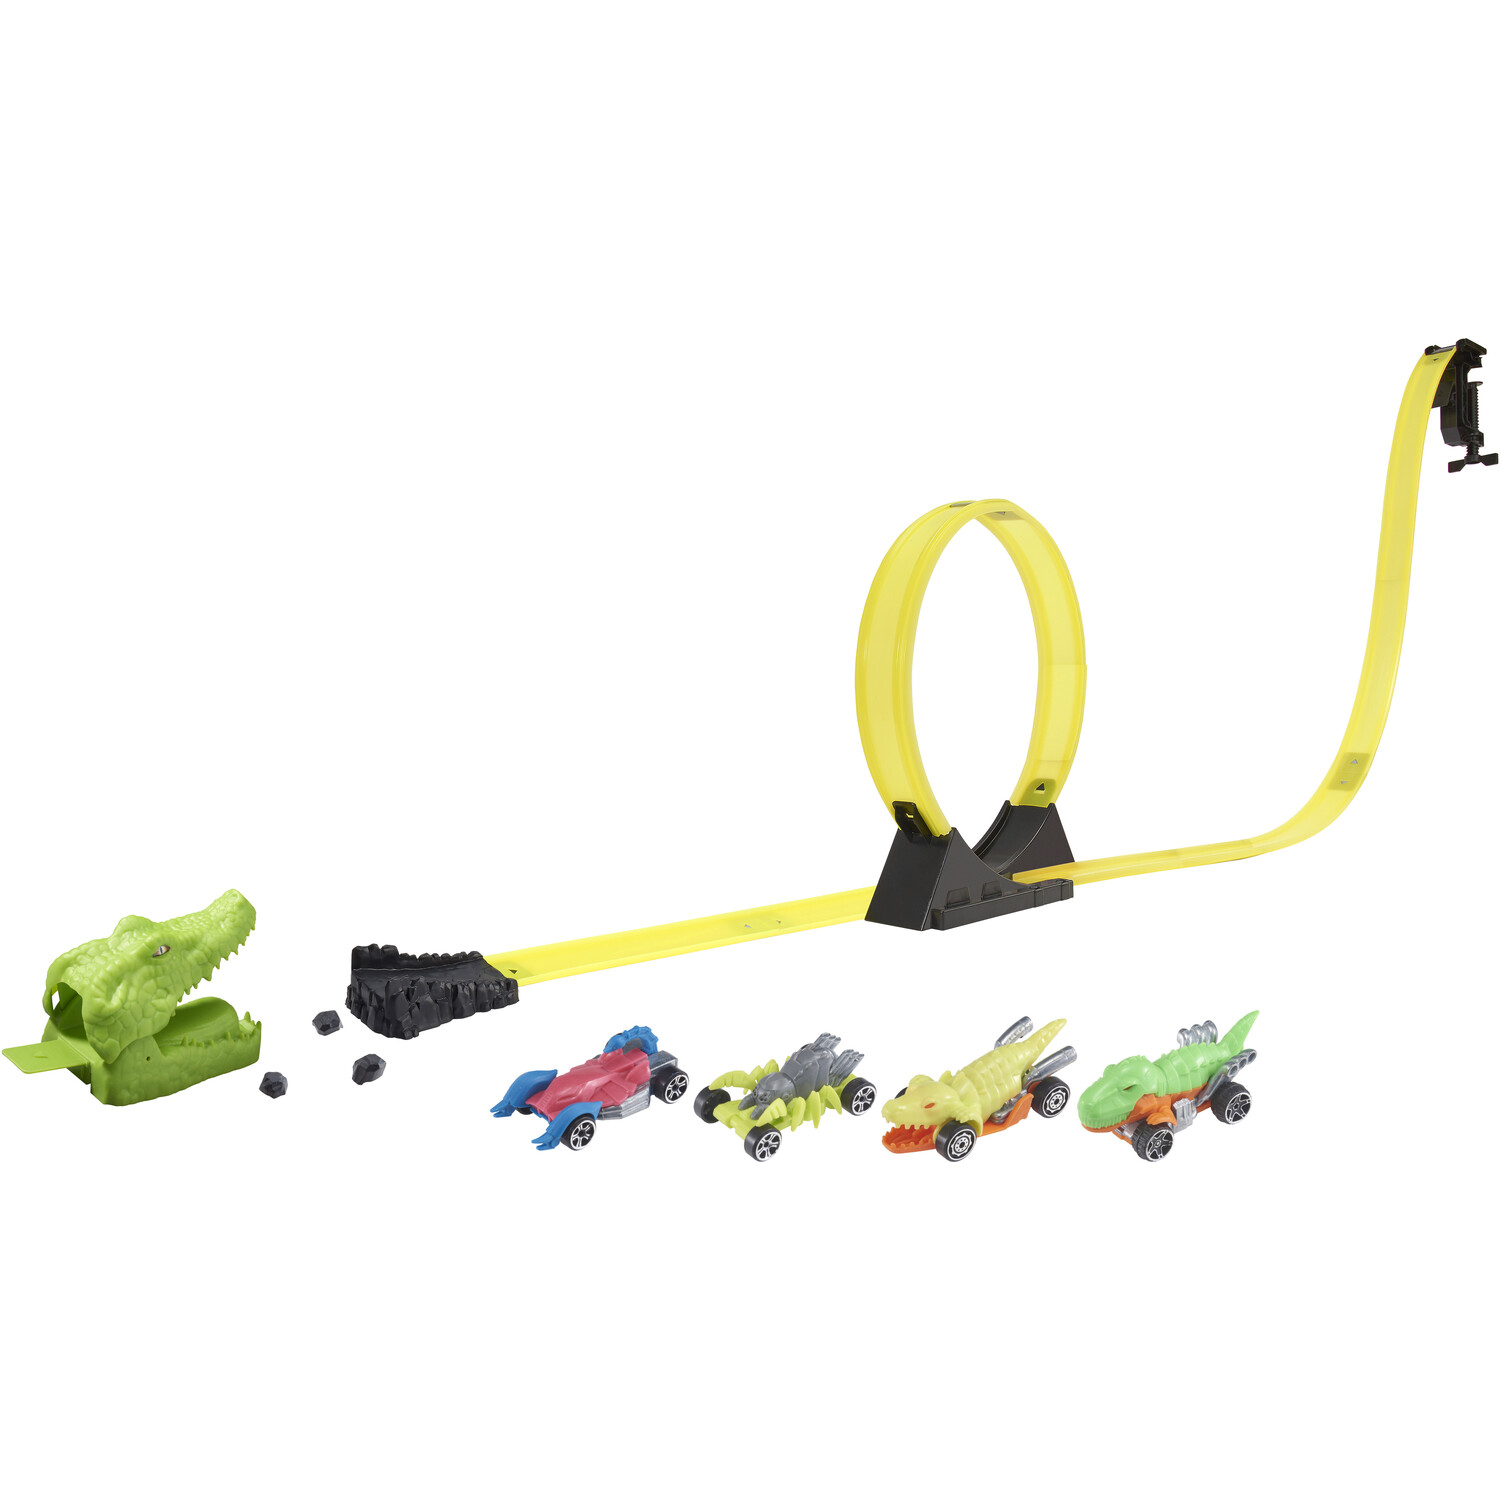 Teamsterz Croc Attack Track Playset Image 4